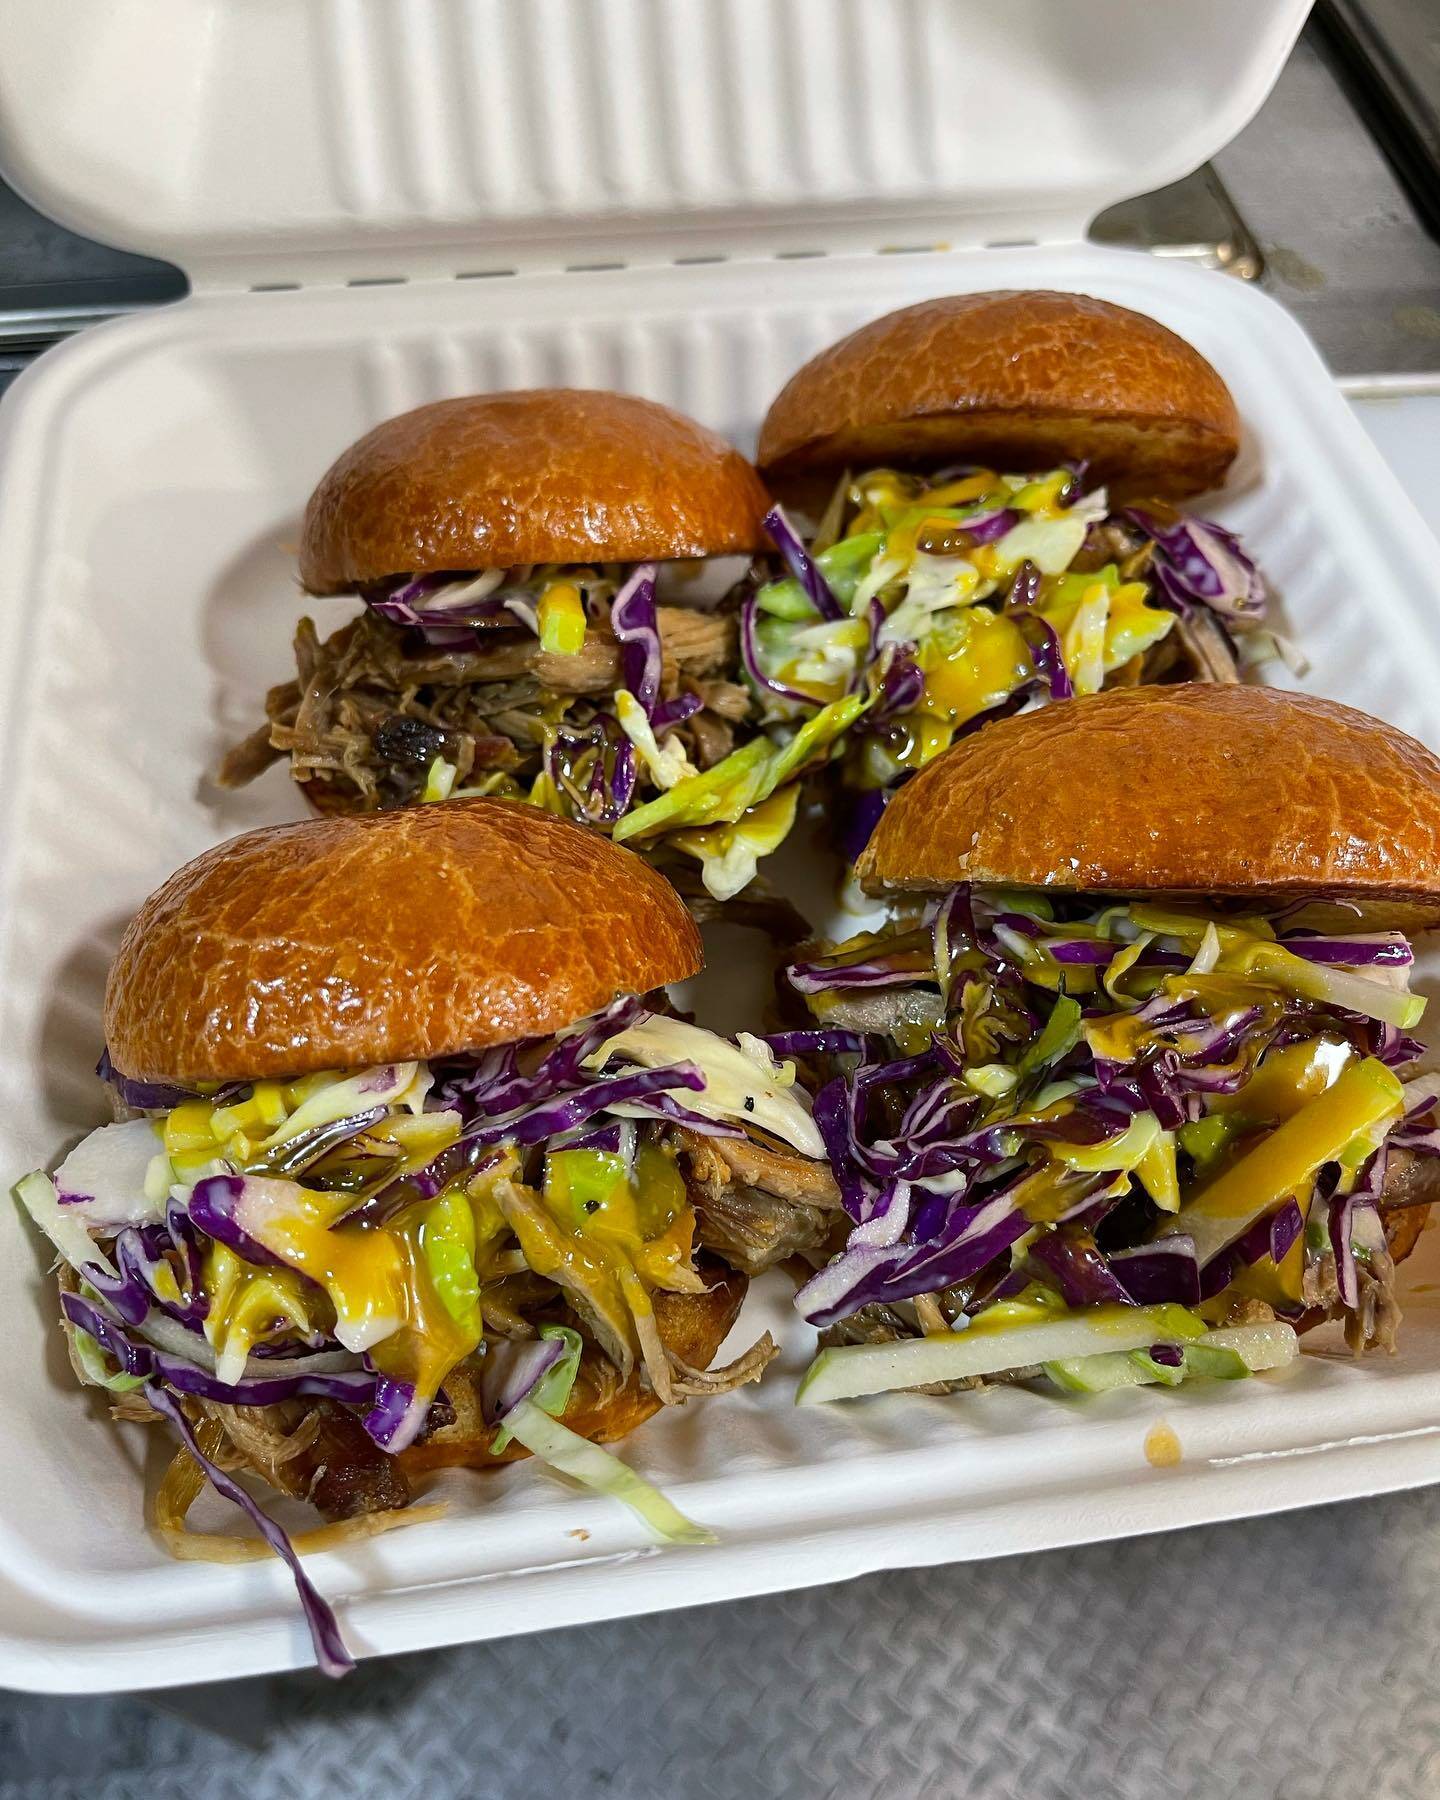 Image courtesy of Southern Nibble
Pork Sliders with fresh coleslaw and homemade sauce are one of the menu items that customers said keep them returning to Southern Nibble, a food truck run by married couple Charmaine and Caleb Messinger.